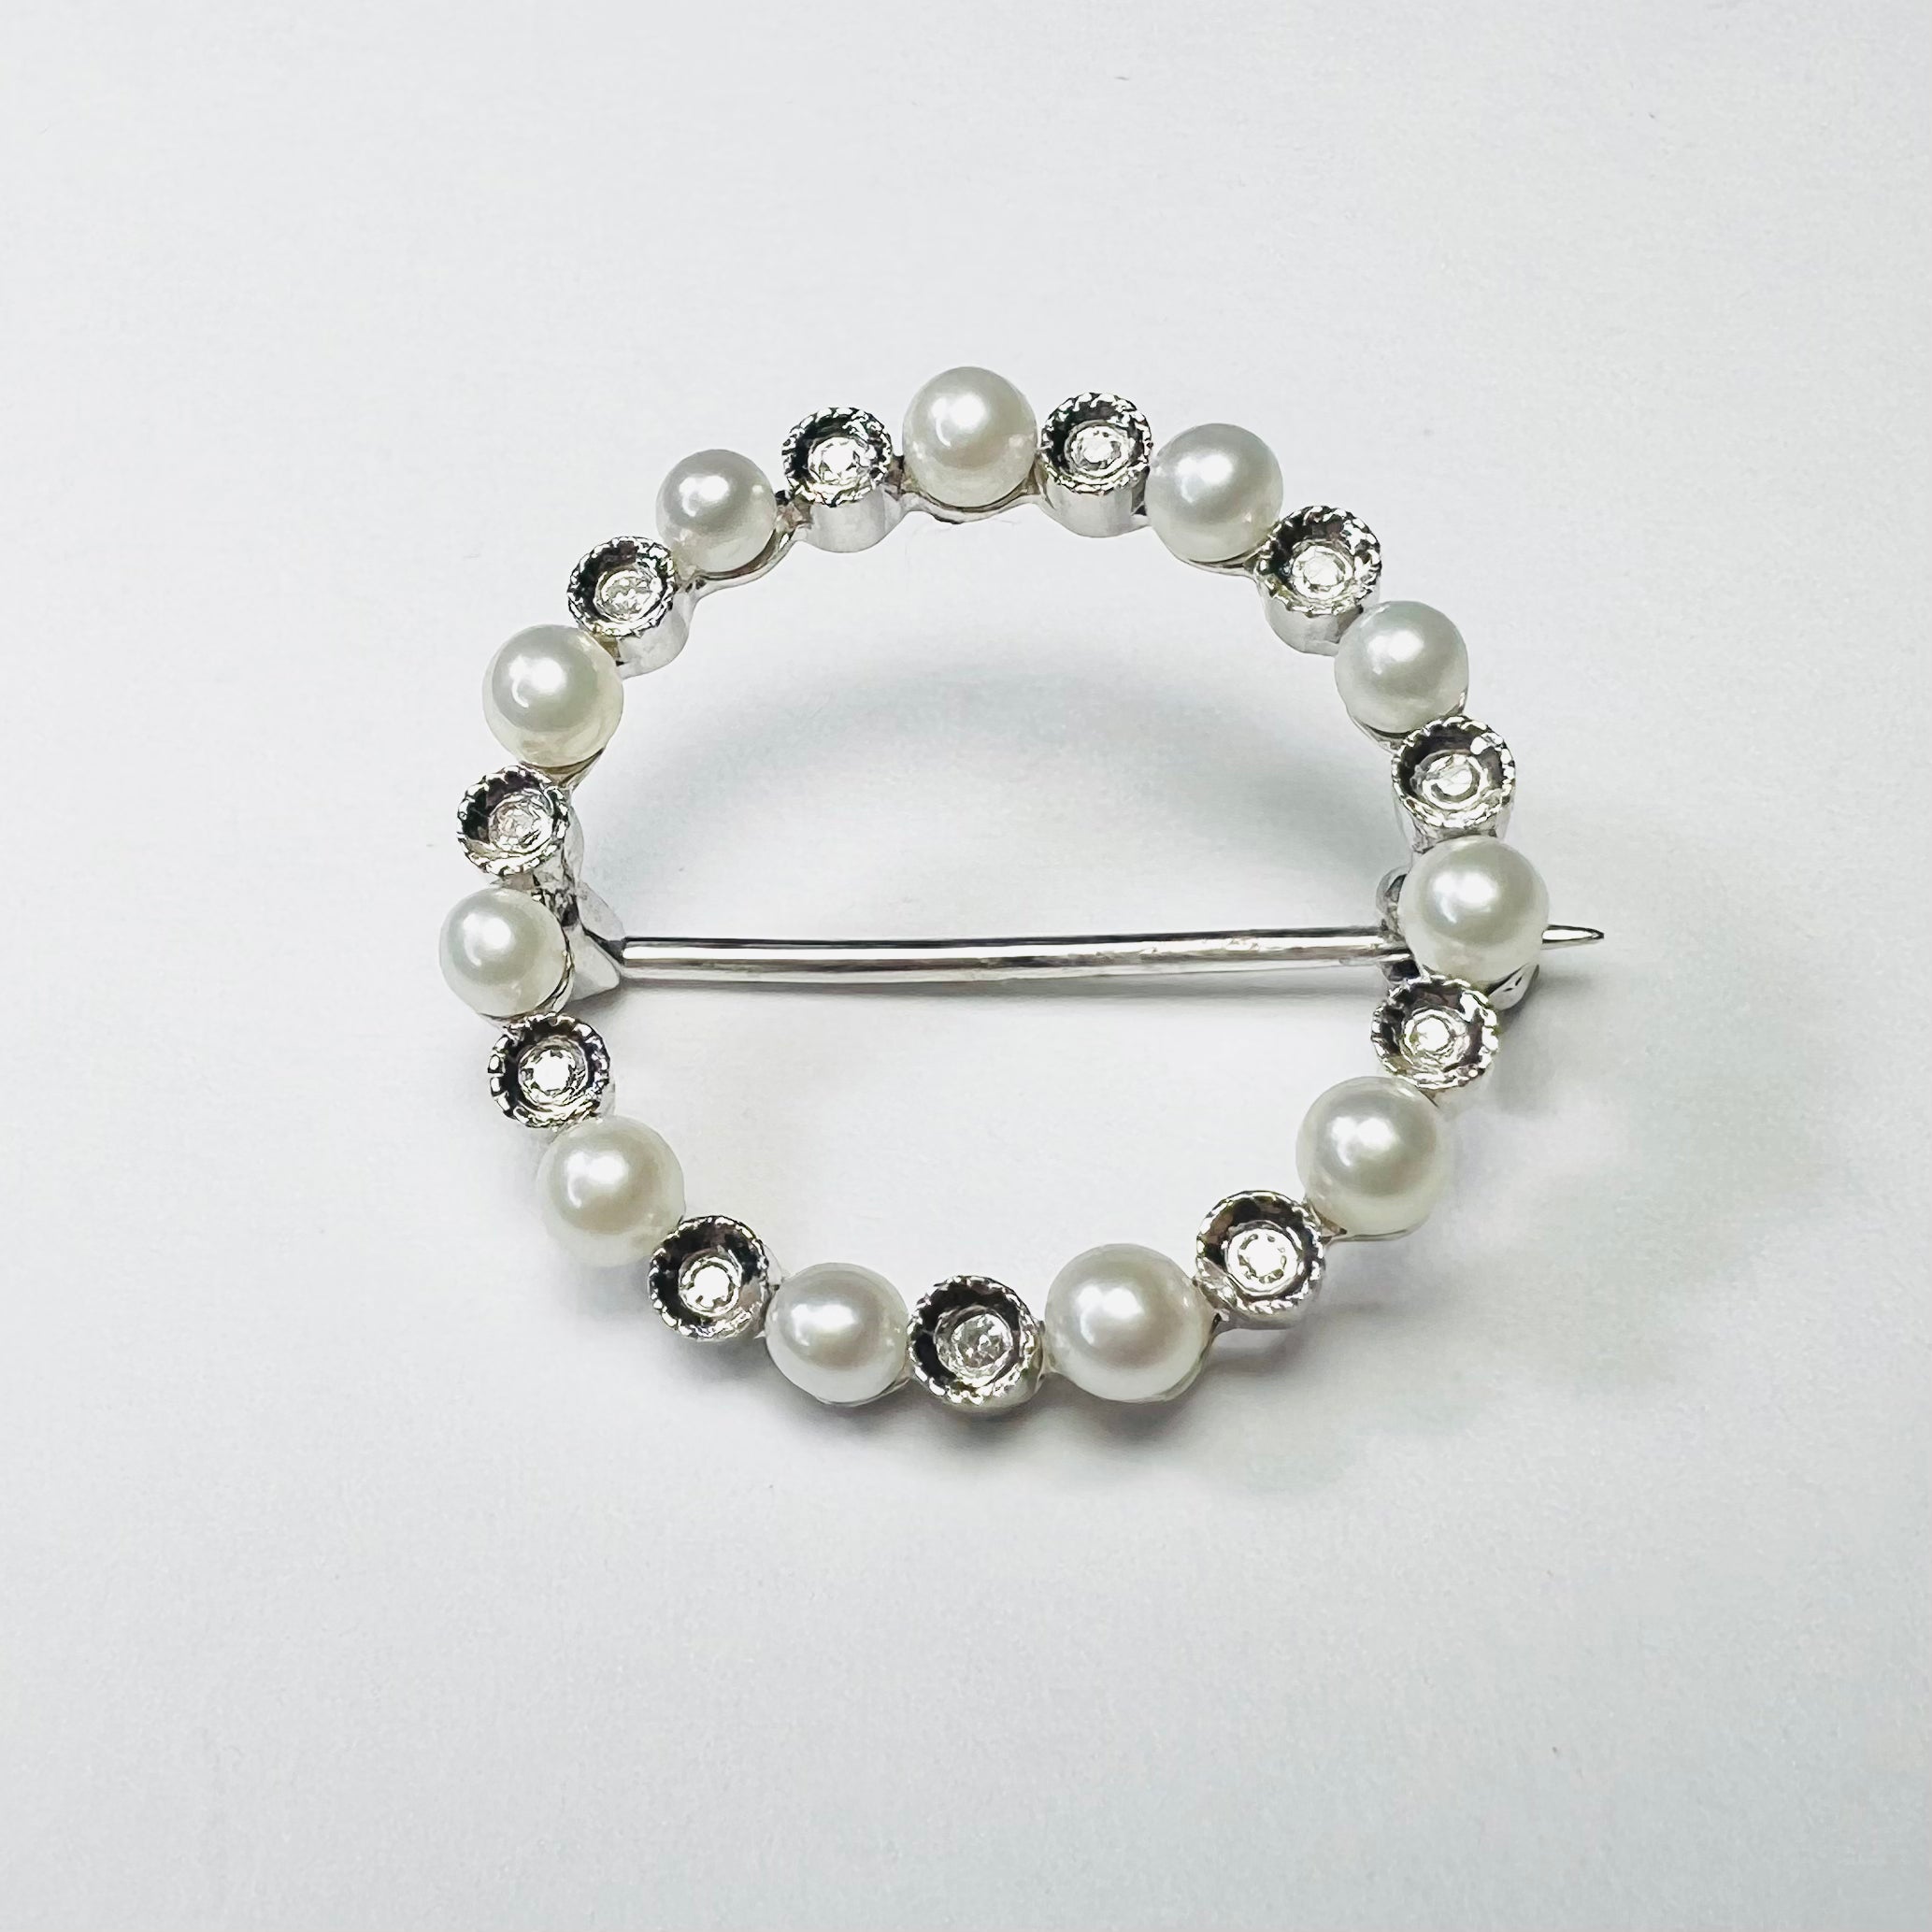 Solid 14K White Gold Pearl & Diamond Round Broach Pin .78"